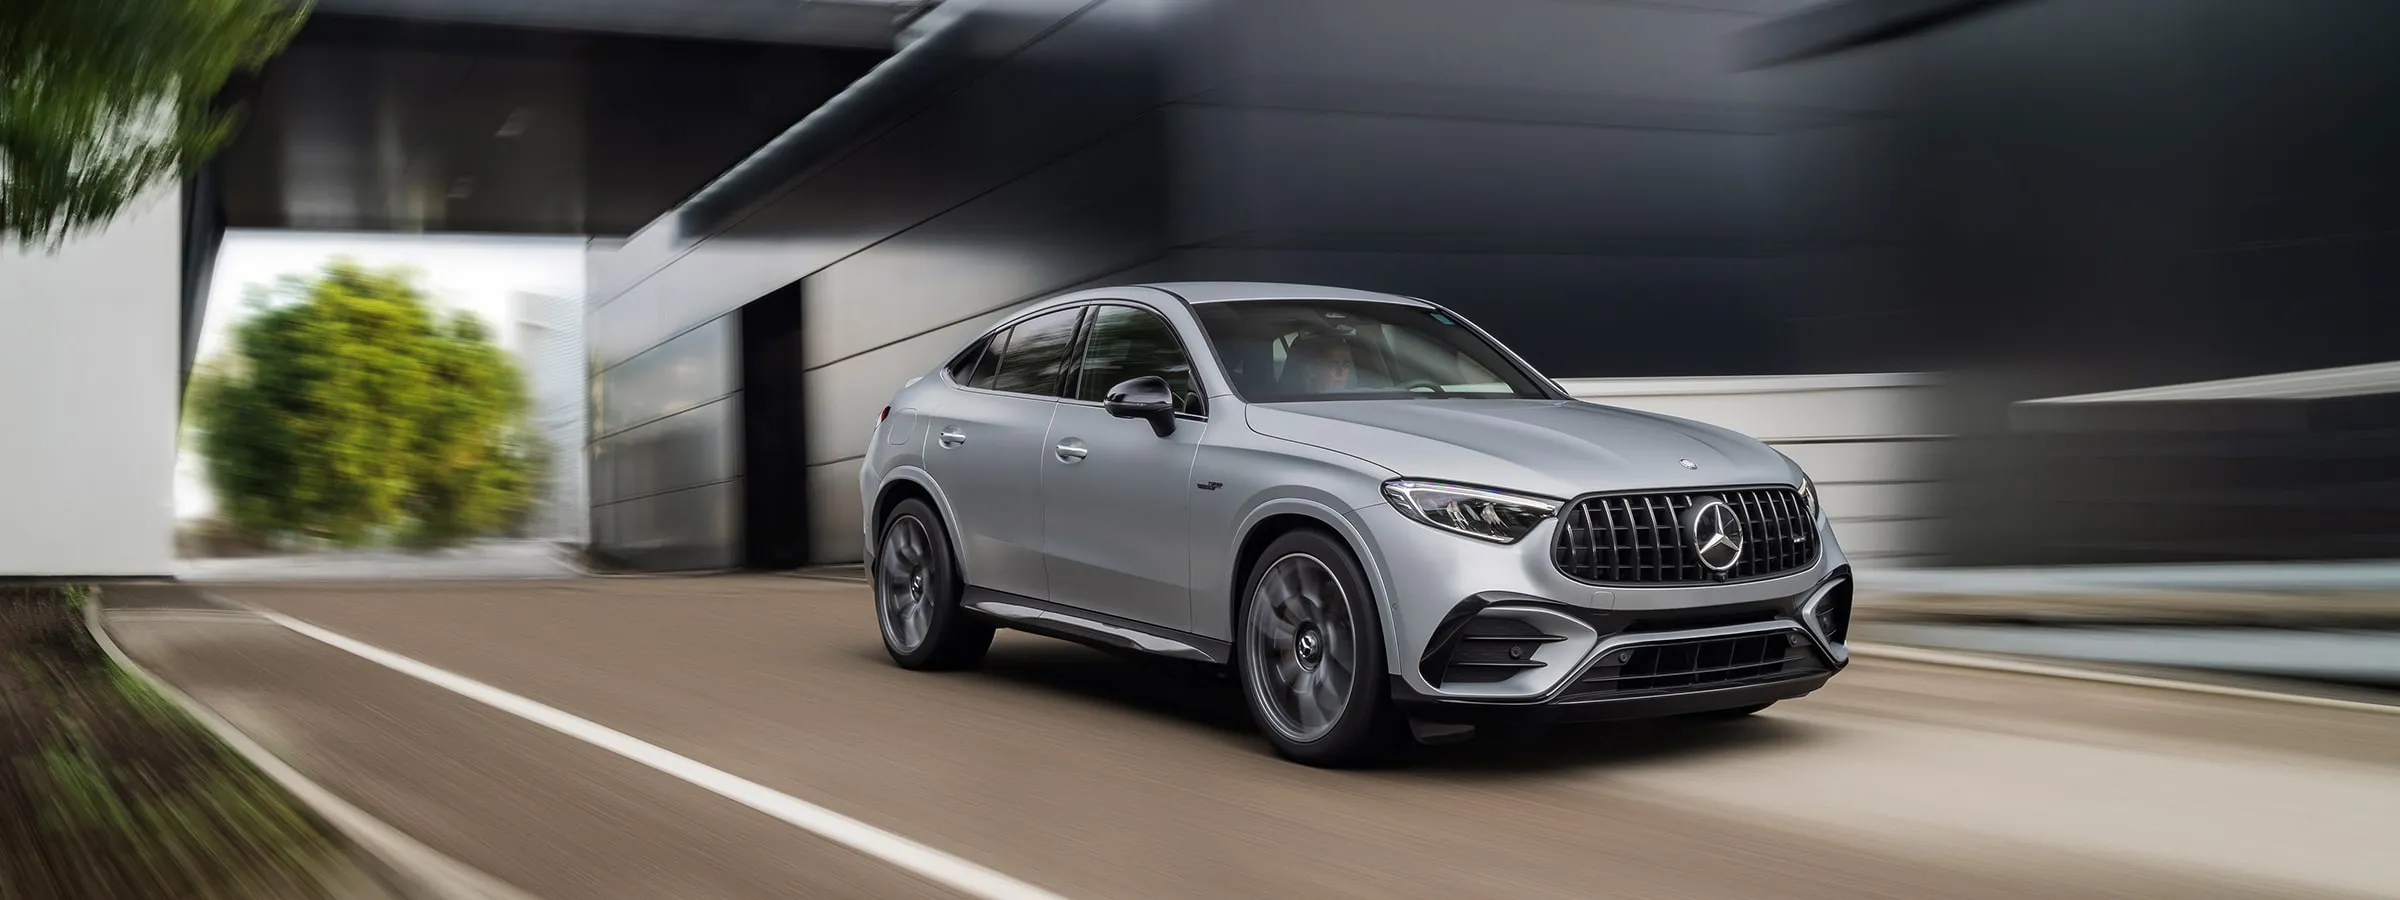 https://www.mbusa.com/content/dam/mb-nafta/us/future-vehicles/my24/amg-glc-coupe/specialty-hero/2024-AMG-GLC-COUPE-HERO-DR.jpg